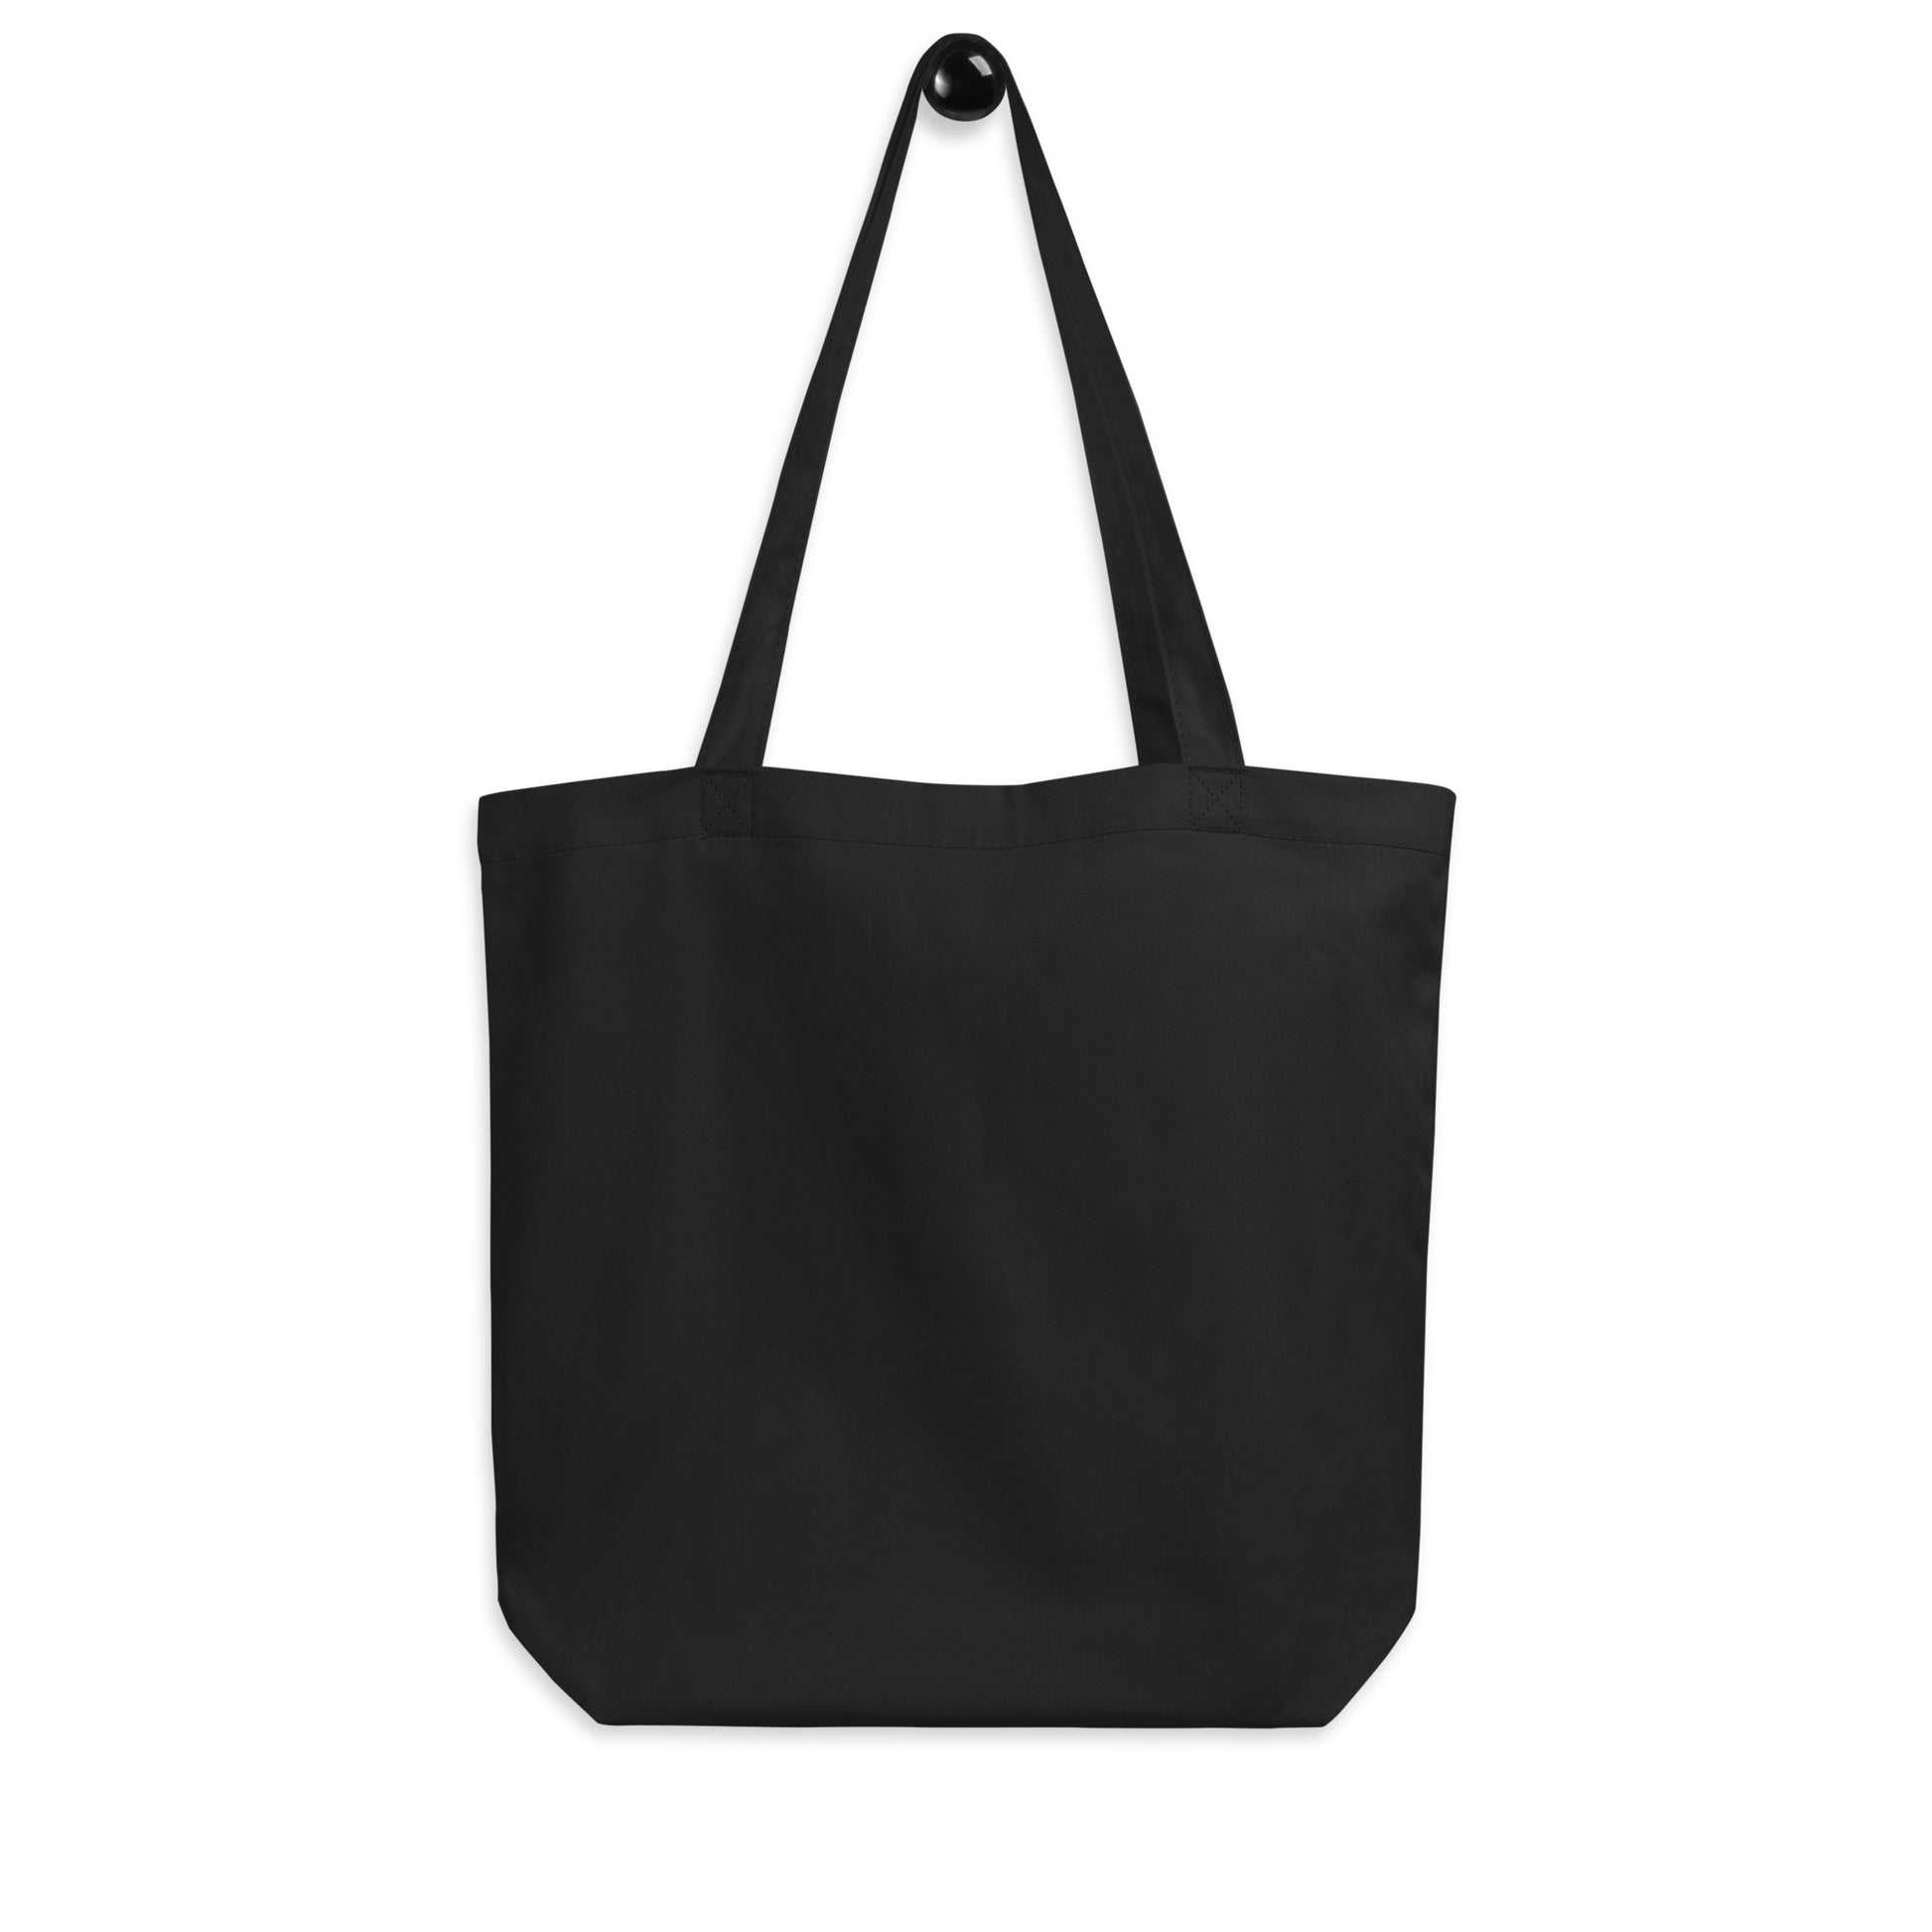 Unique Travel Gift Organic Tote - White Oval • YHZ Halifax • YHM Designs - Image 05